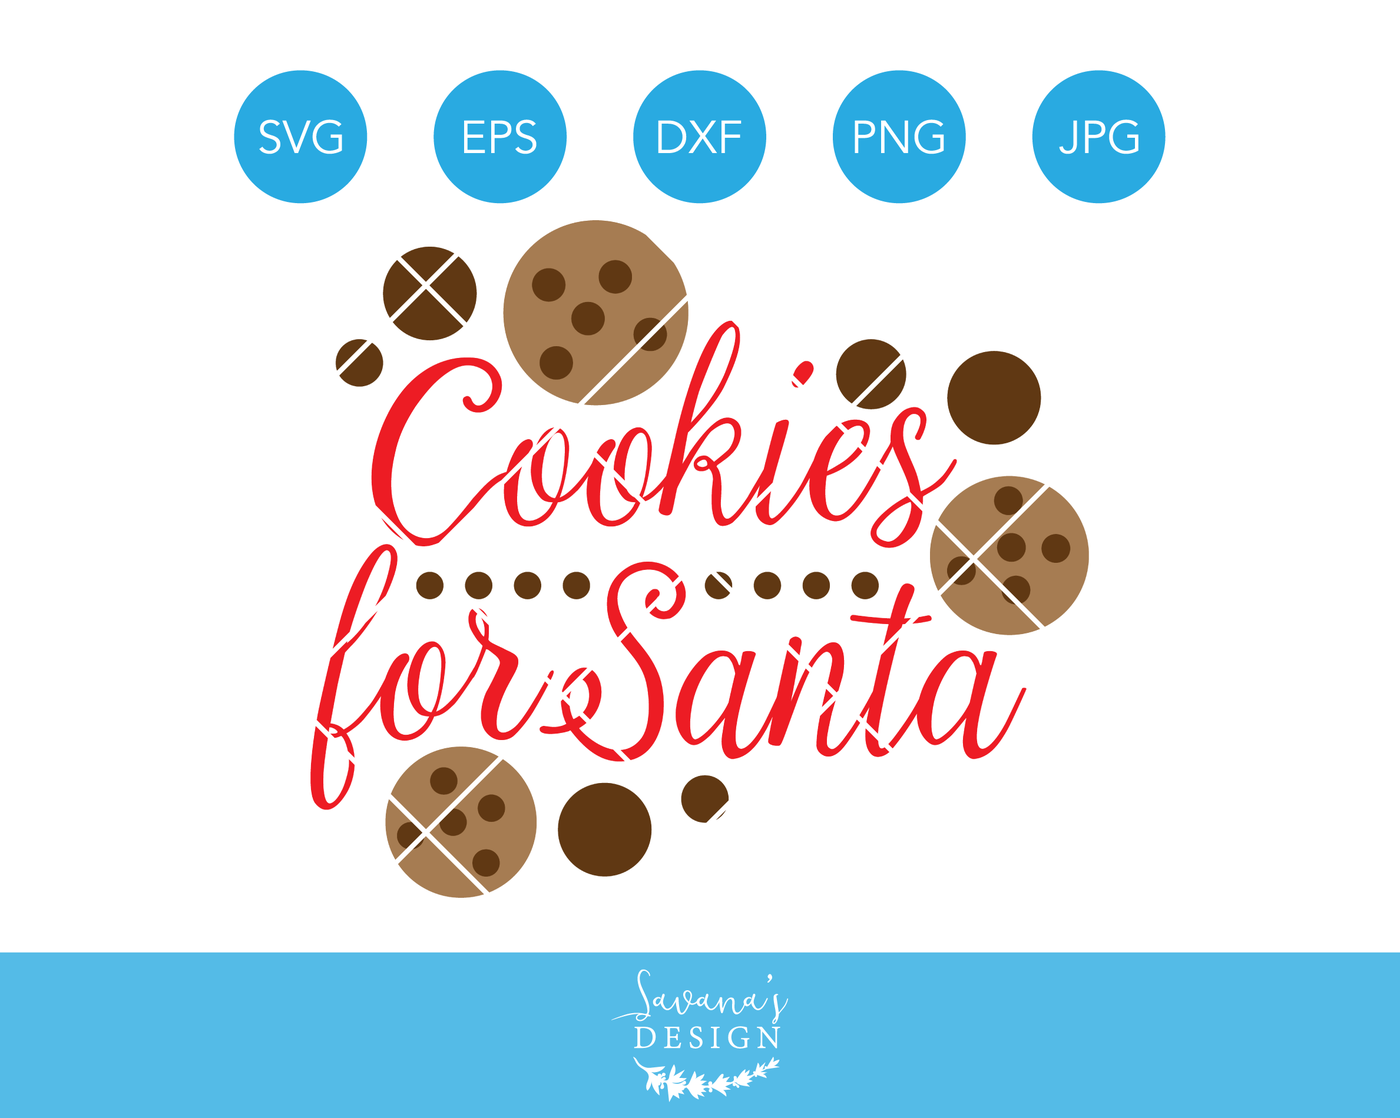 clipart cookies file